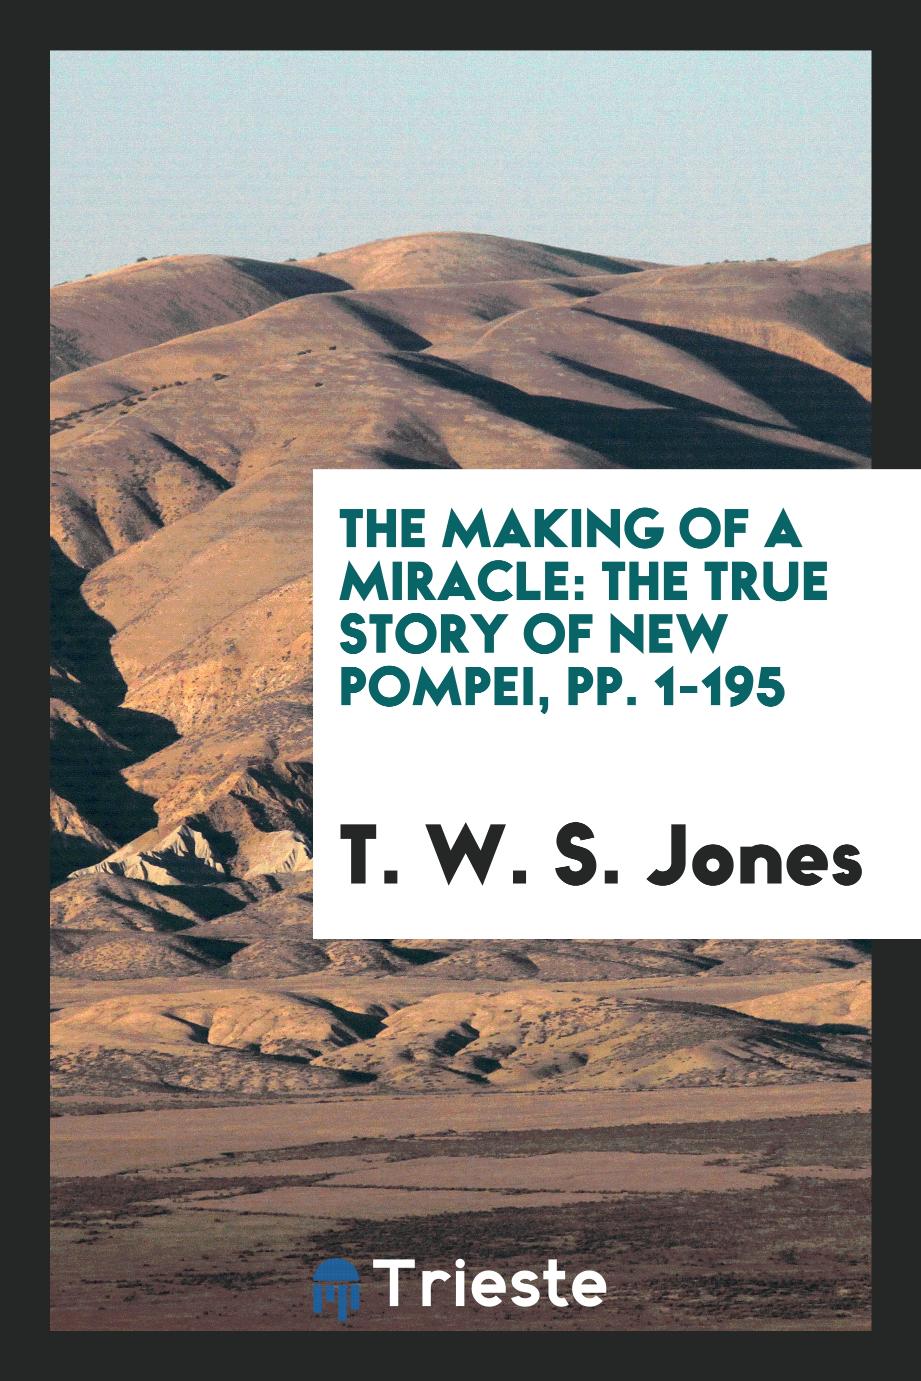 The Making of a Miracle: The True Story of New Pompei, pp. 1-195